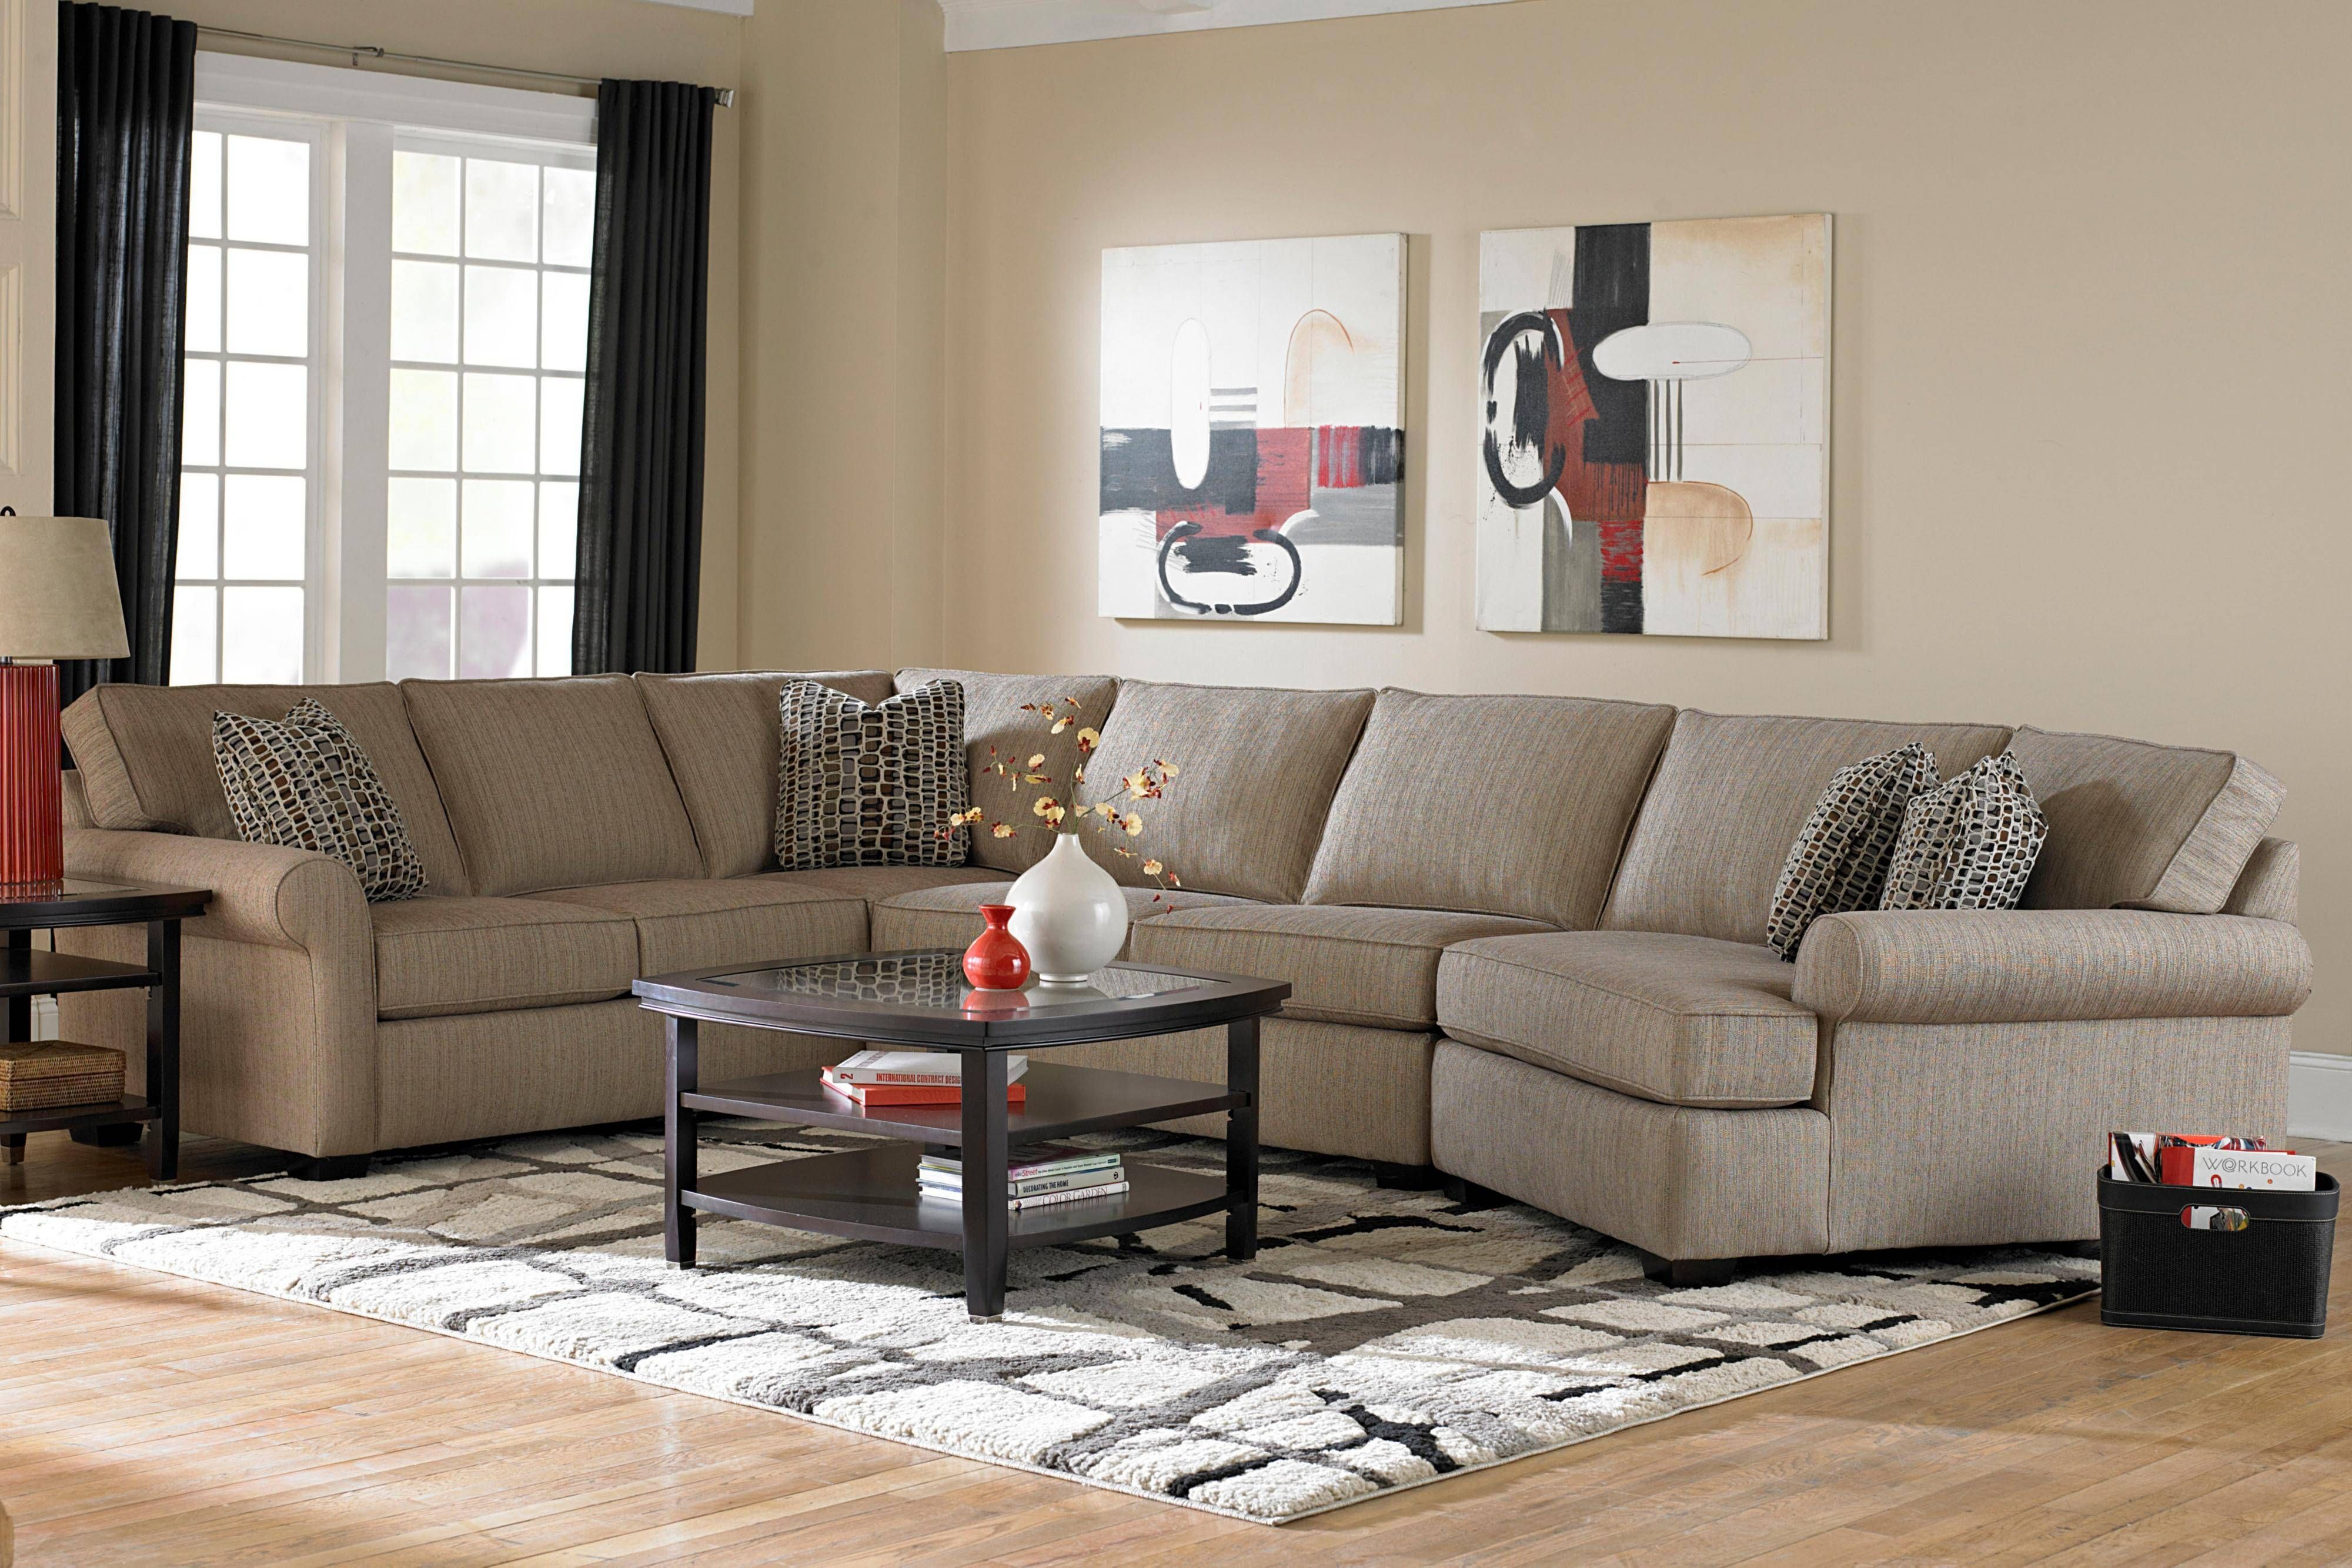 Broyhill Furniture Ethan Transitional Sectional Sofa With Right Within Broyhill Sectional Sofas (View 30 of 30)